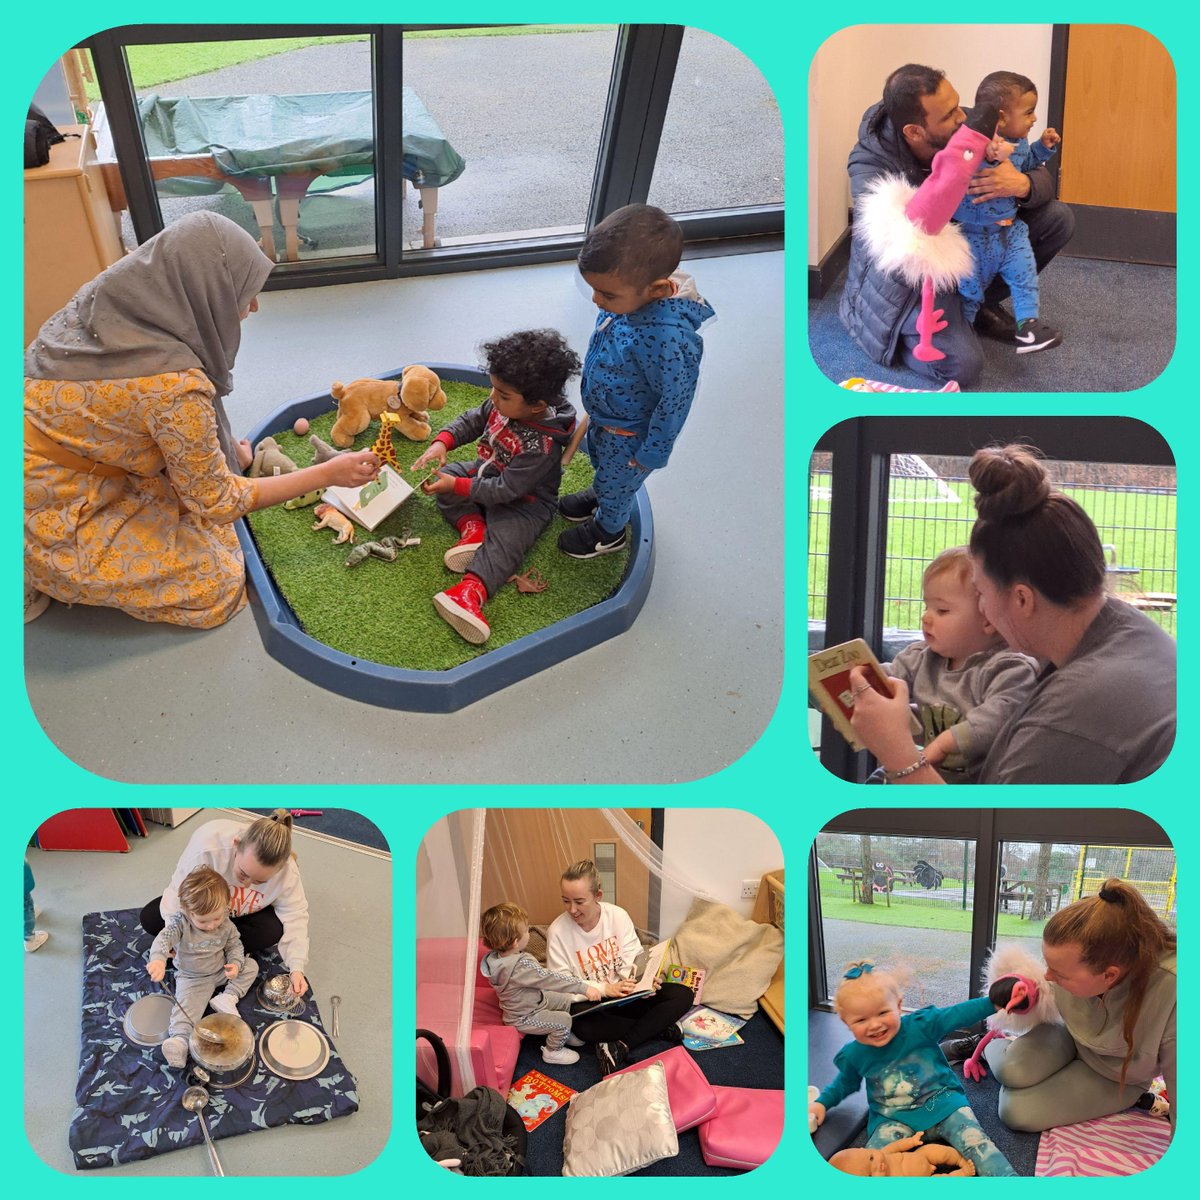 Yesterday in our Early Words Session we explored how sharing stories, music and rhymes can help develop our children's communication. Look at all the fun we had! Early Words will be back at 1pm on Tuesday 20th February 😊